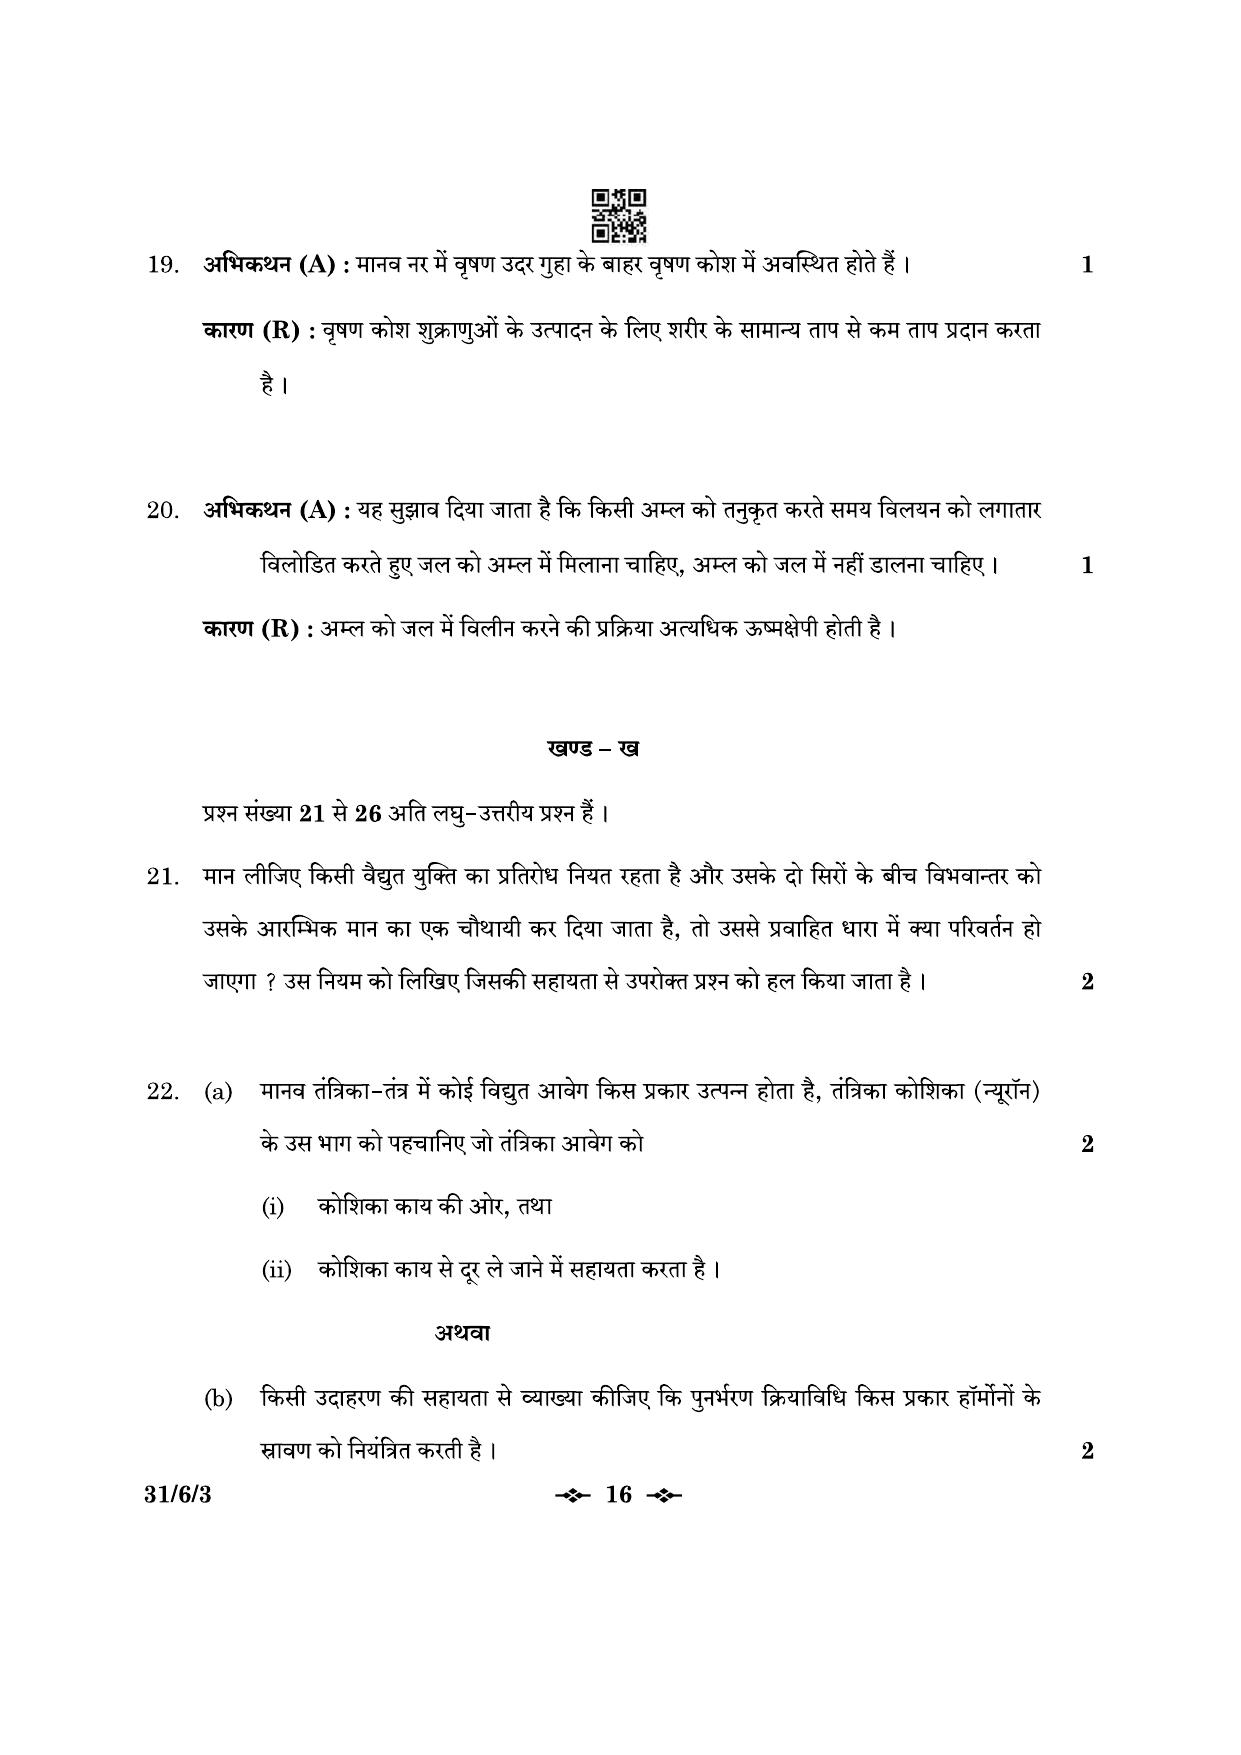 CBSE Class 10 31-6-3 Science 2023 Question Paper - Page 16